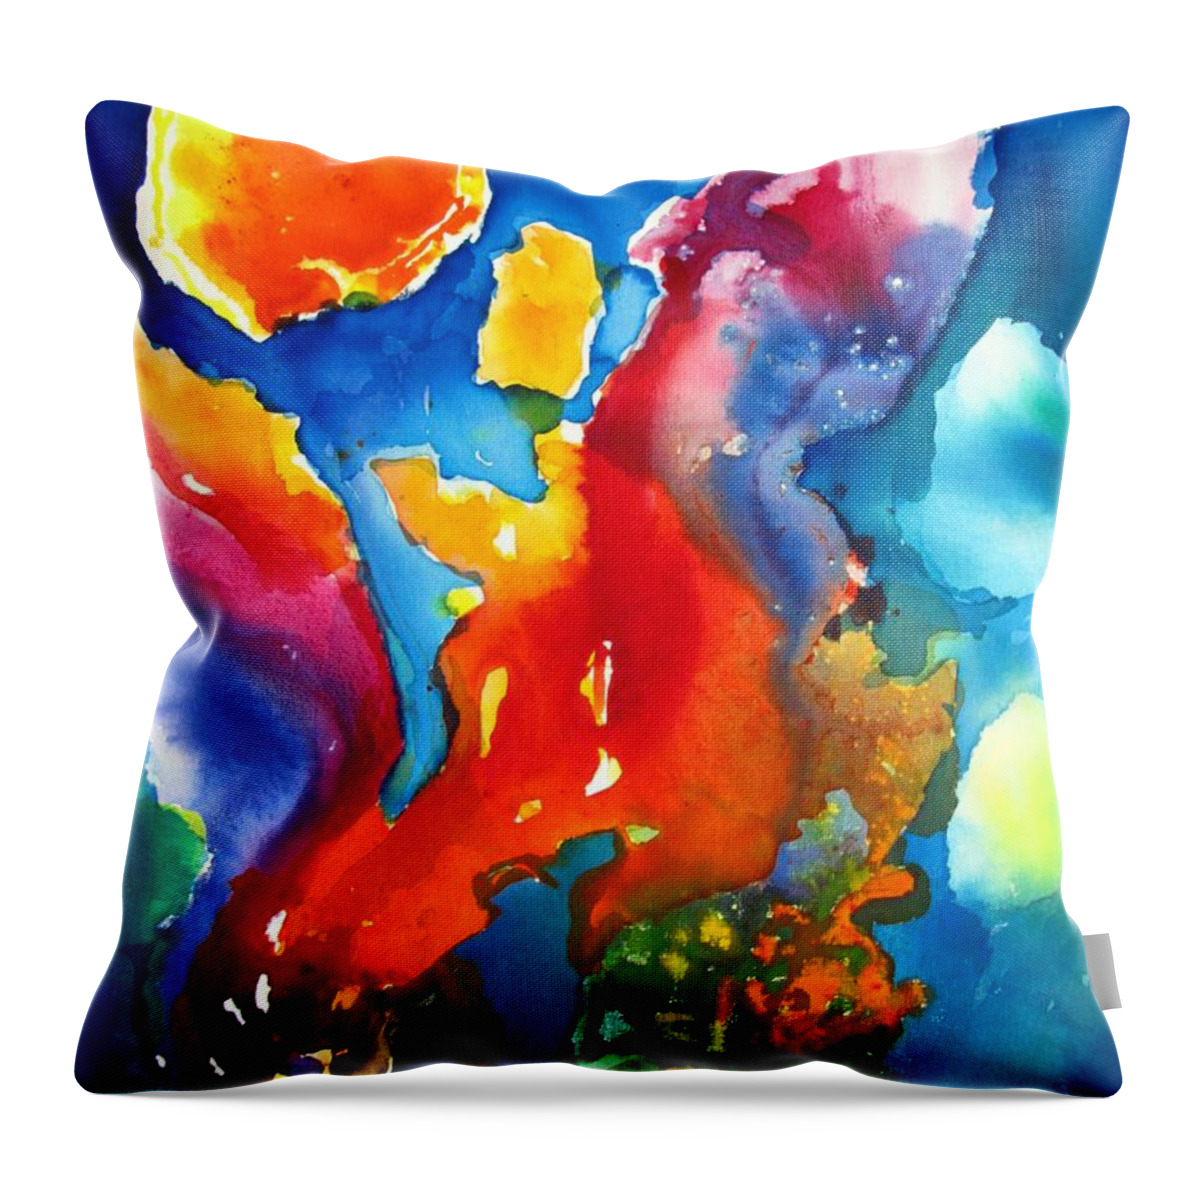 Abstract Throw Pillow featuring the painting Cosmic Fire Abstract by Carlin Blahnik CarlinArtWatercolor